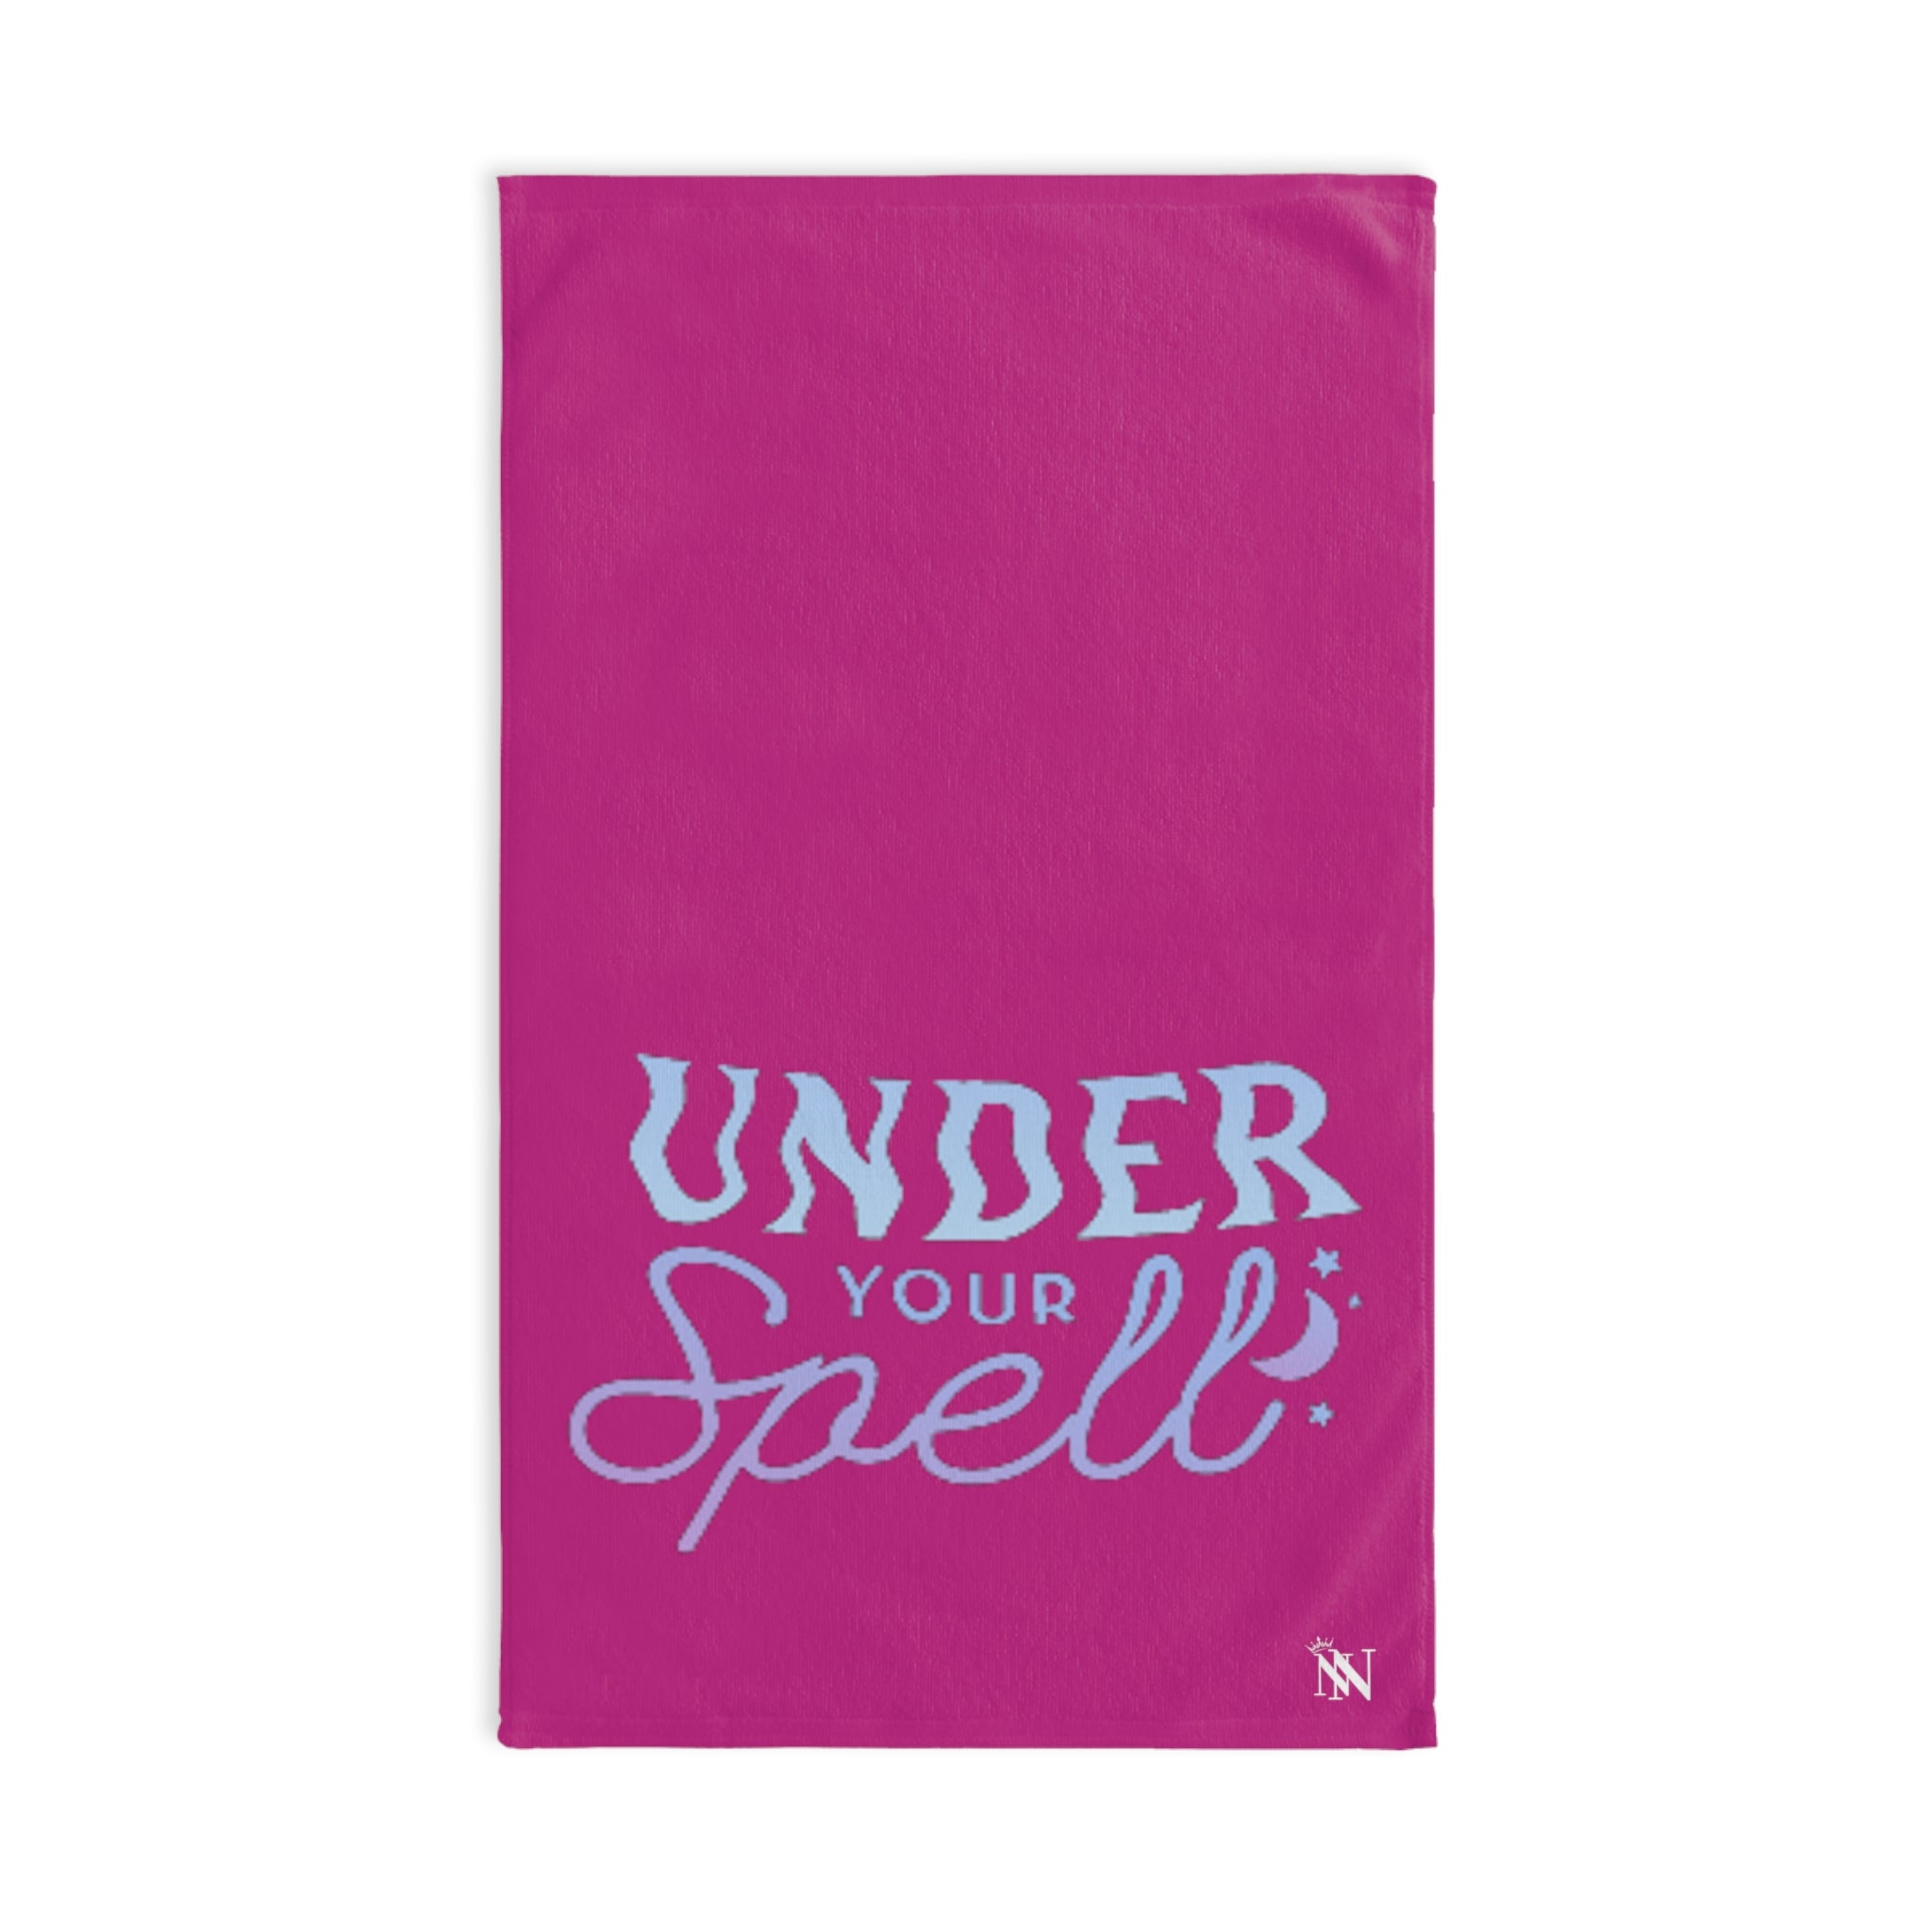 Spell Under Cast Fuscia | Funny Gifts for Men - Gifts for Him - Birthday Gifts for Men, Him, Husband, Boyfriend, New Couple Gifts, Fathers & Valentines Day Gifts, Hand Towels NECTAR NAPKINS